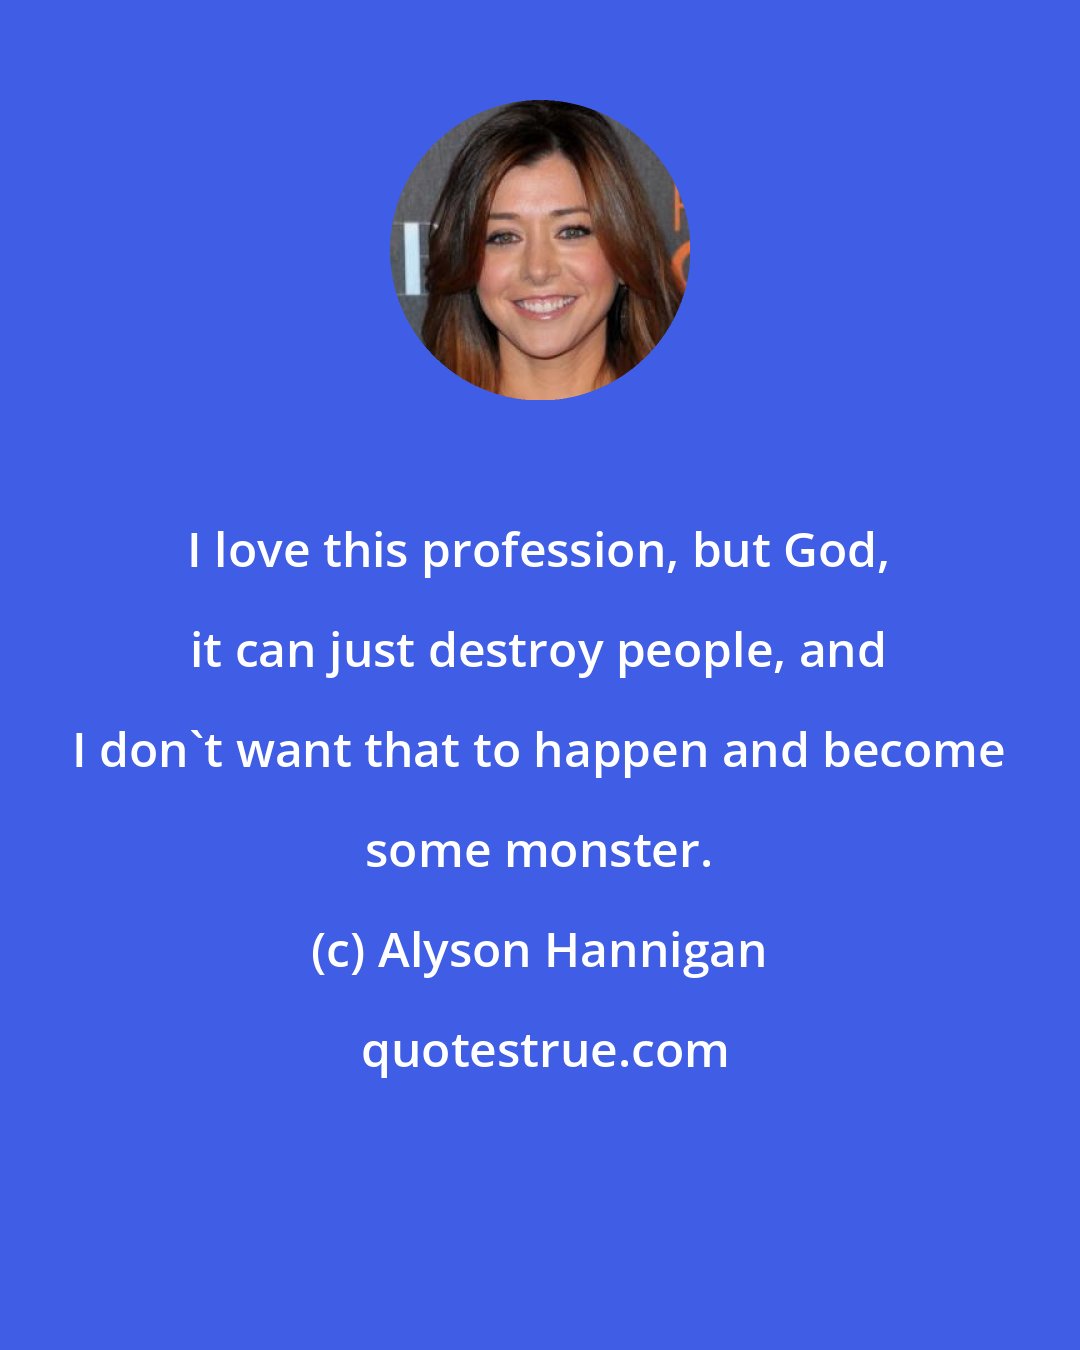 Alyson Hannigan: I love this profession, but God, it can just destroy people, and I don't want that to happen and become some monster.